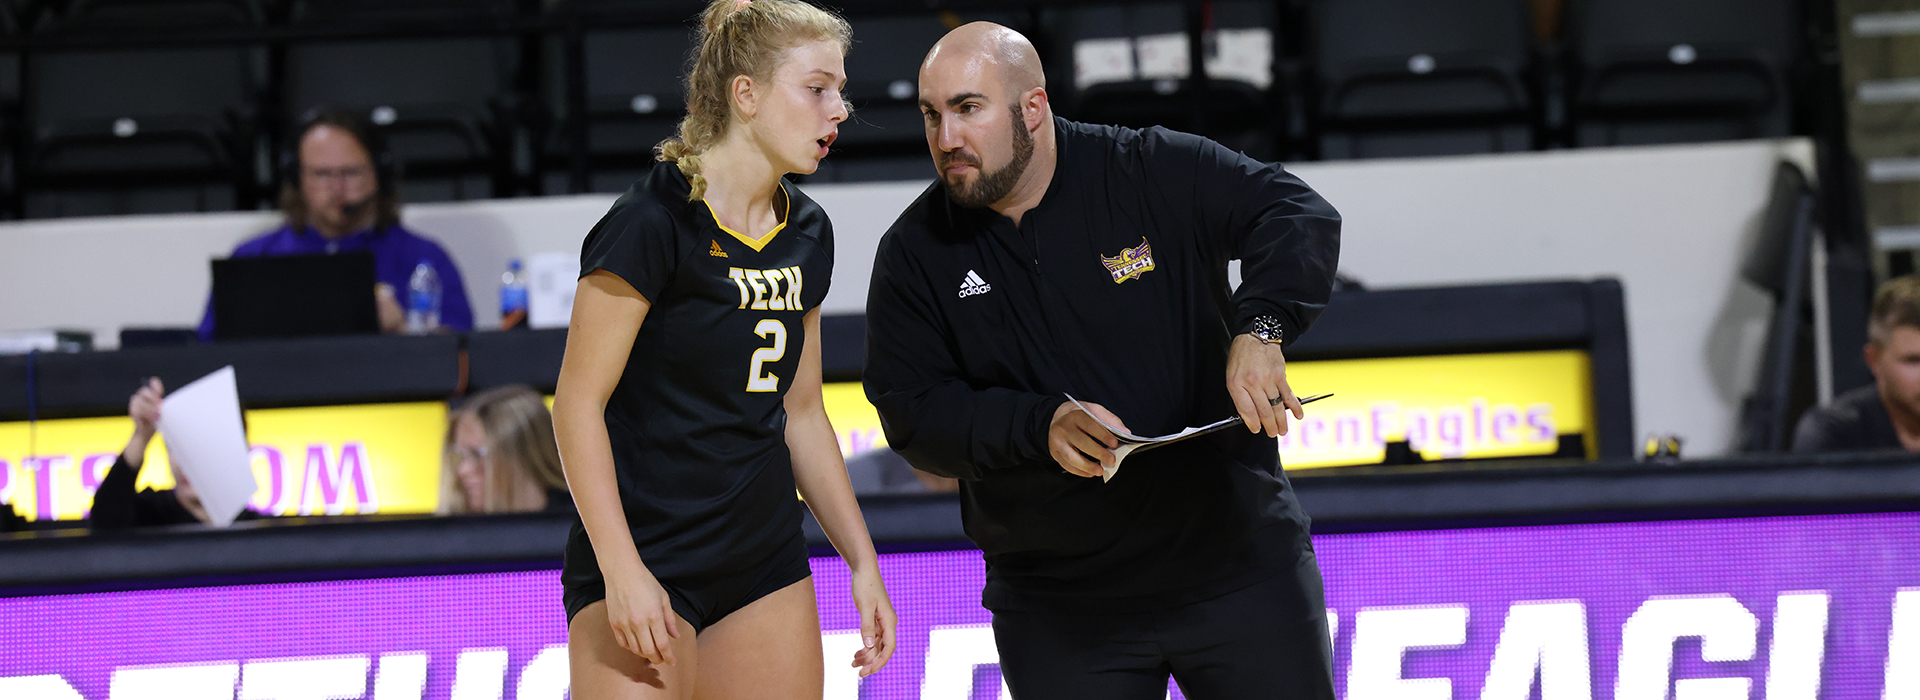 Weinberg elected Assistant Coaches Representative for AVCA Board of Directors